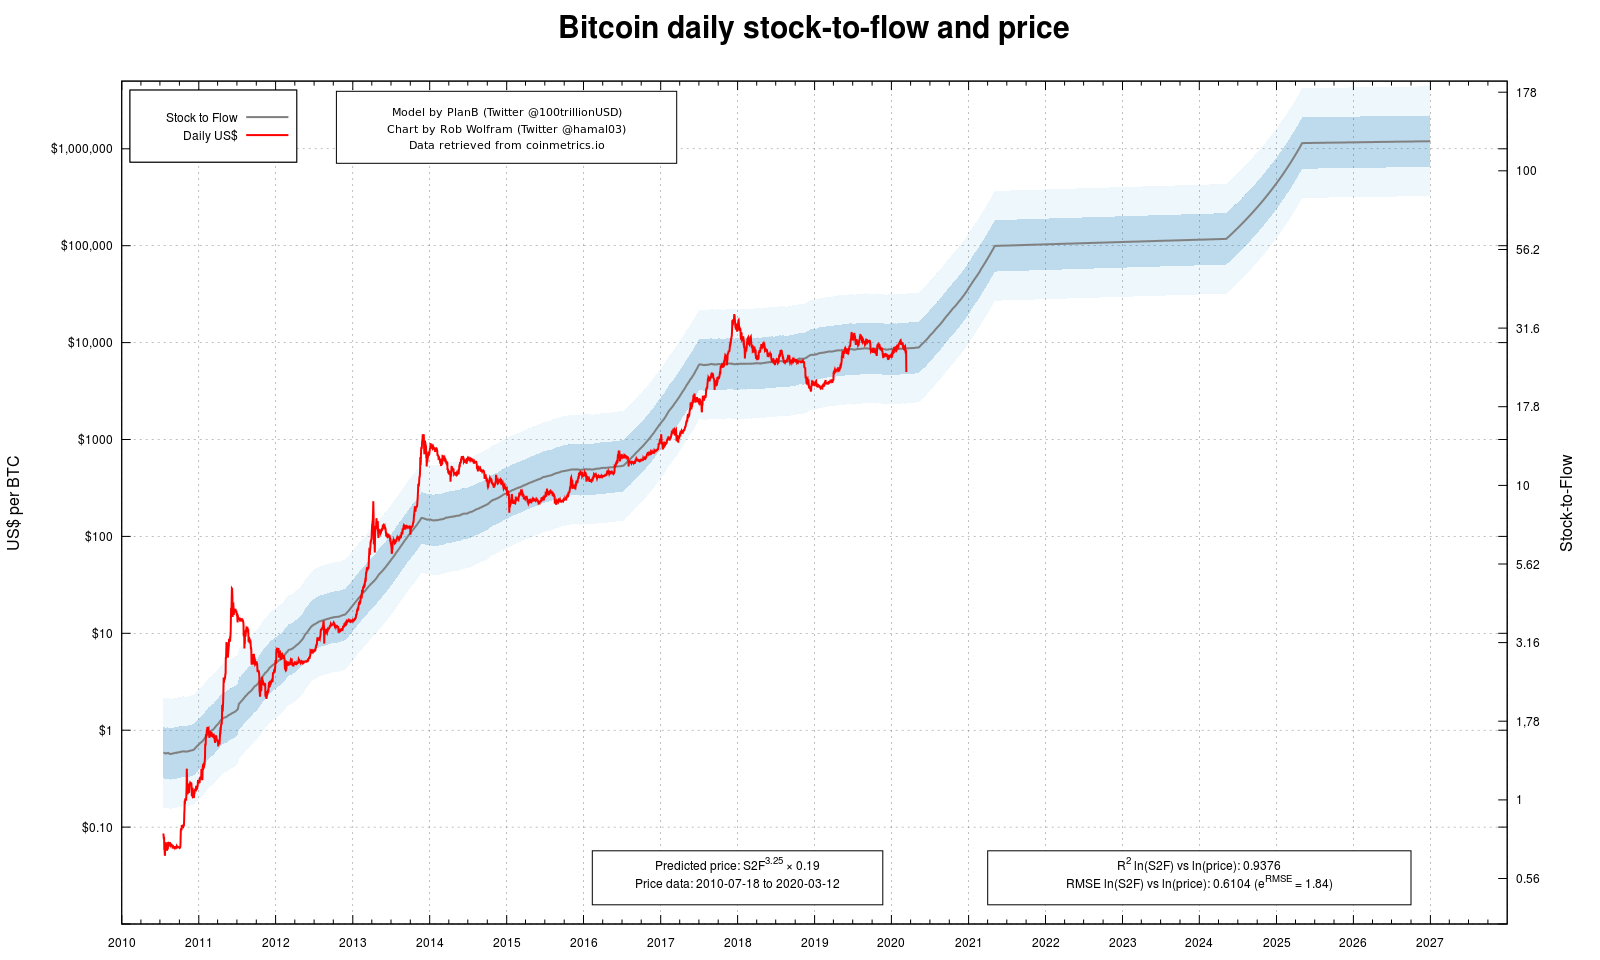 Bitcoin daily stock-to-flow price